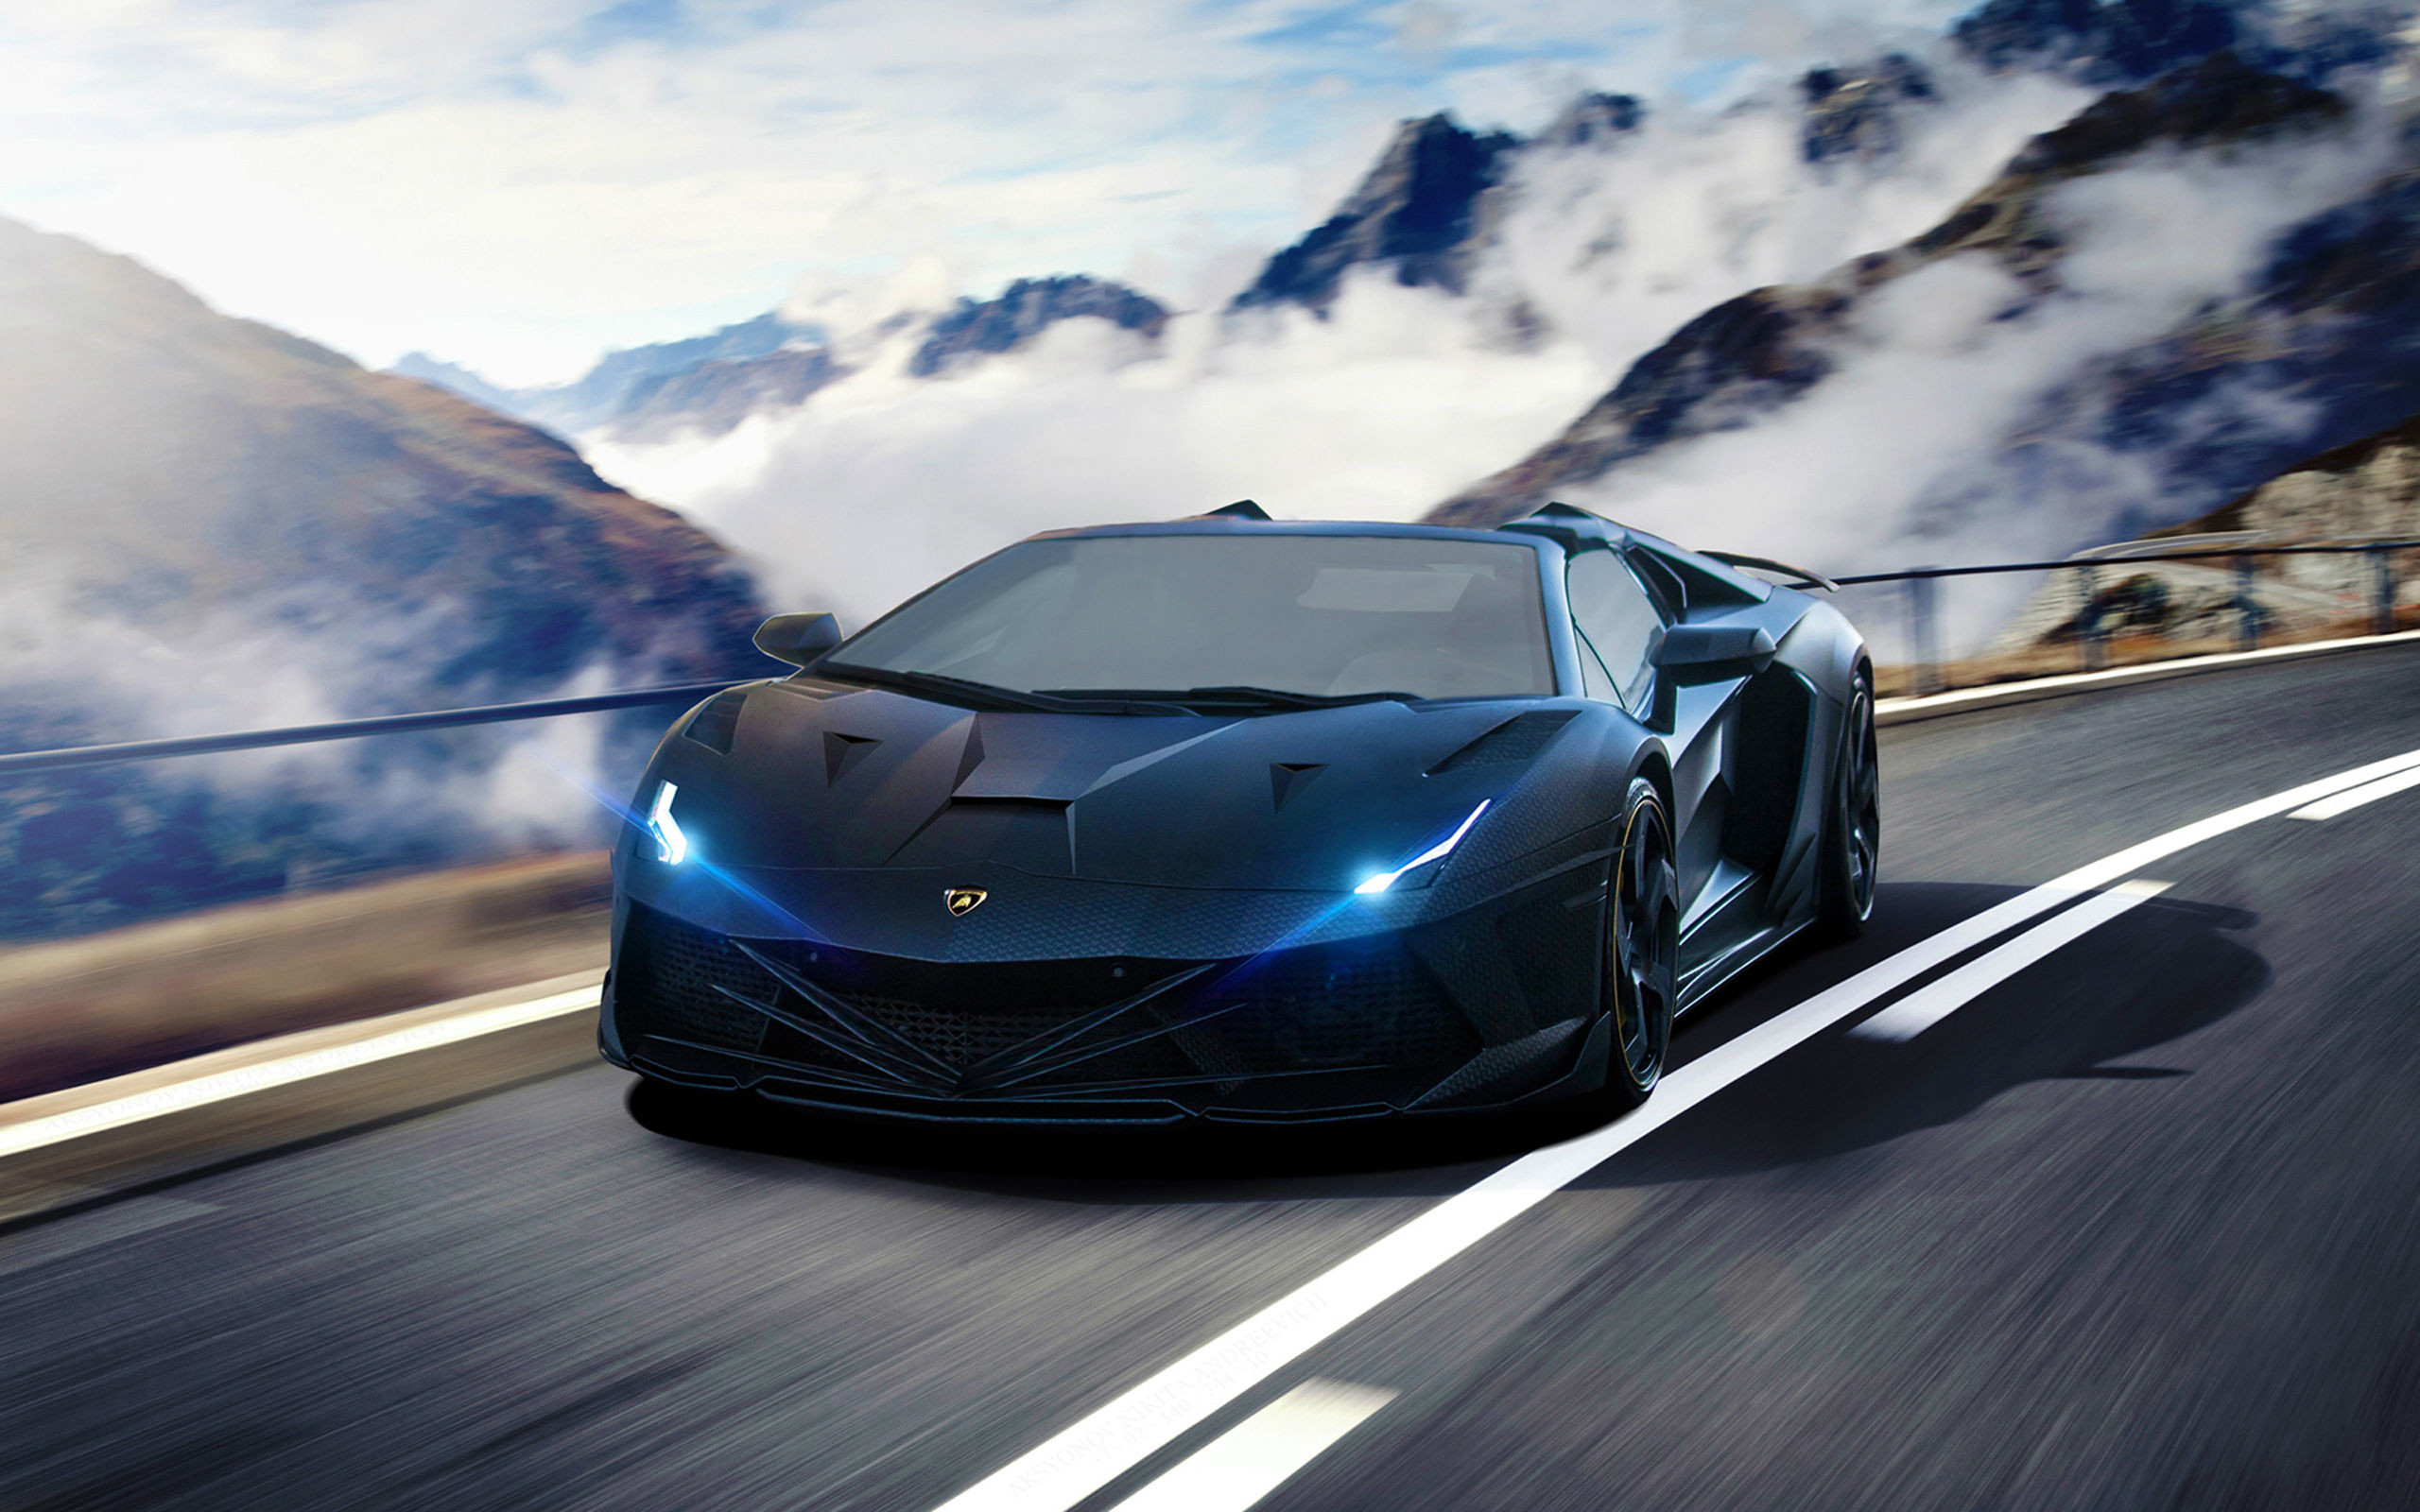 2560x1600 Super Cars Images Hd 63 with Super Cars Images Hd